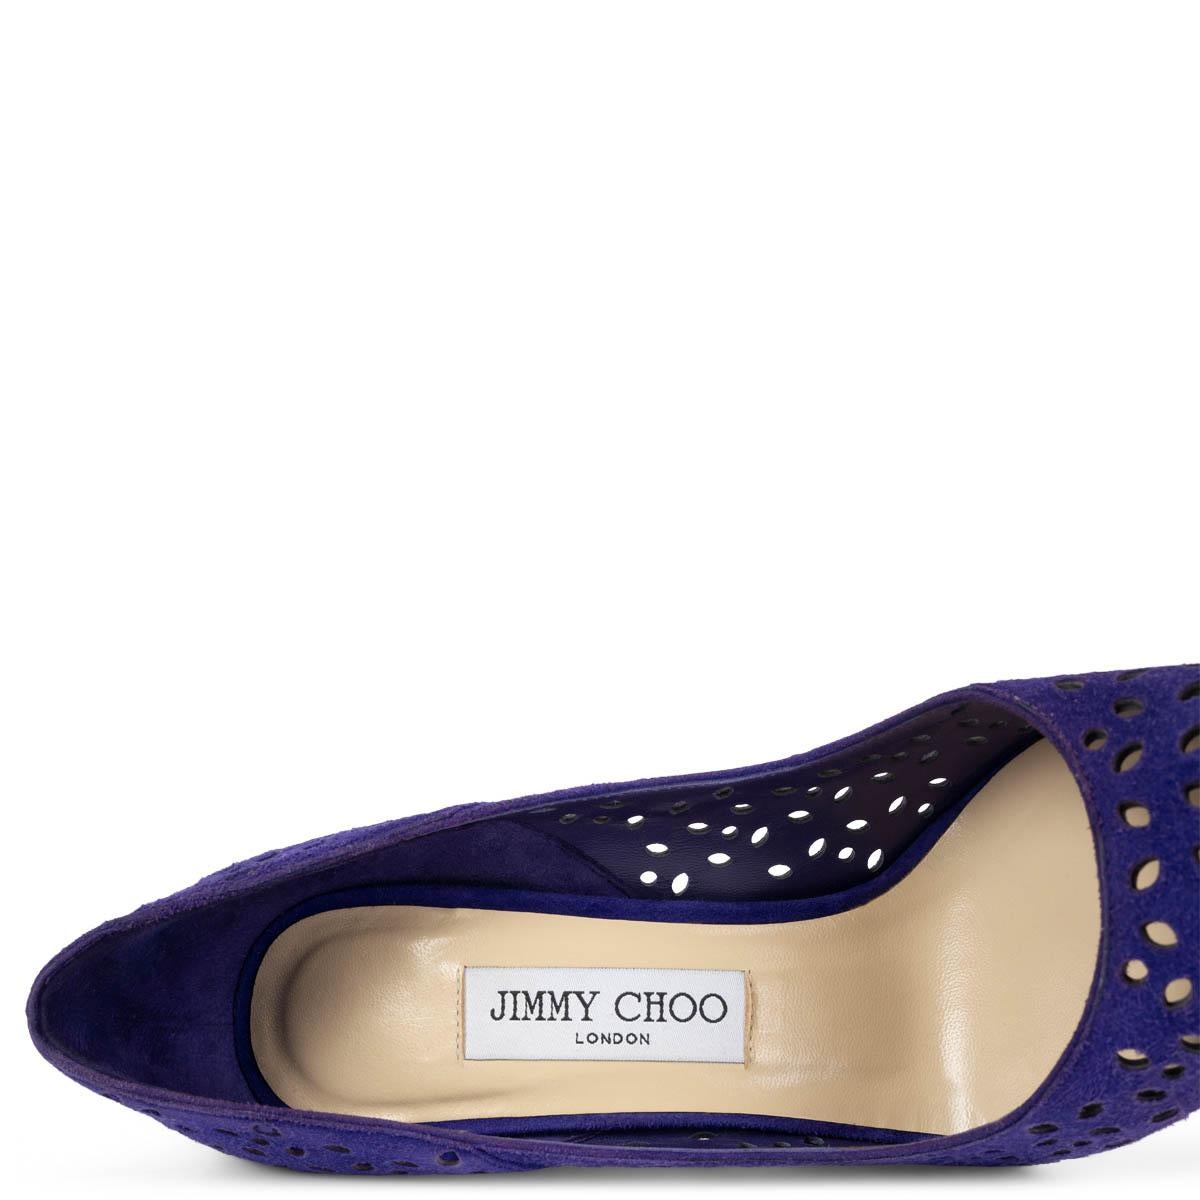 JIMMY CHOO purple suede PERFORATED ANOUK Pumps Shoes 37.5 For Sale 2